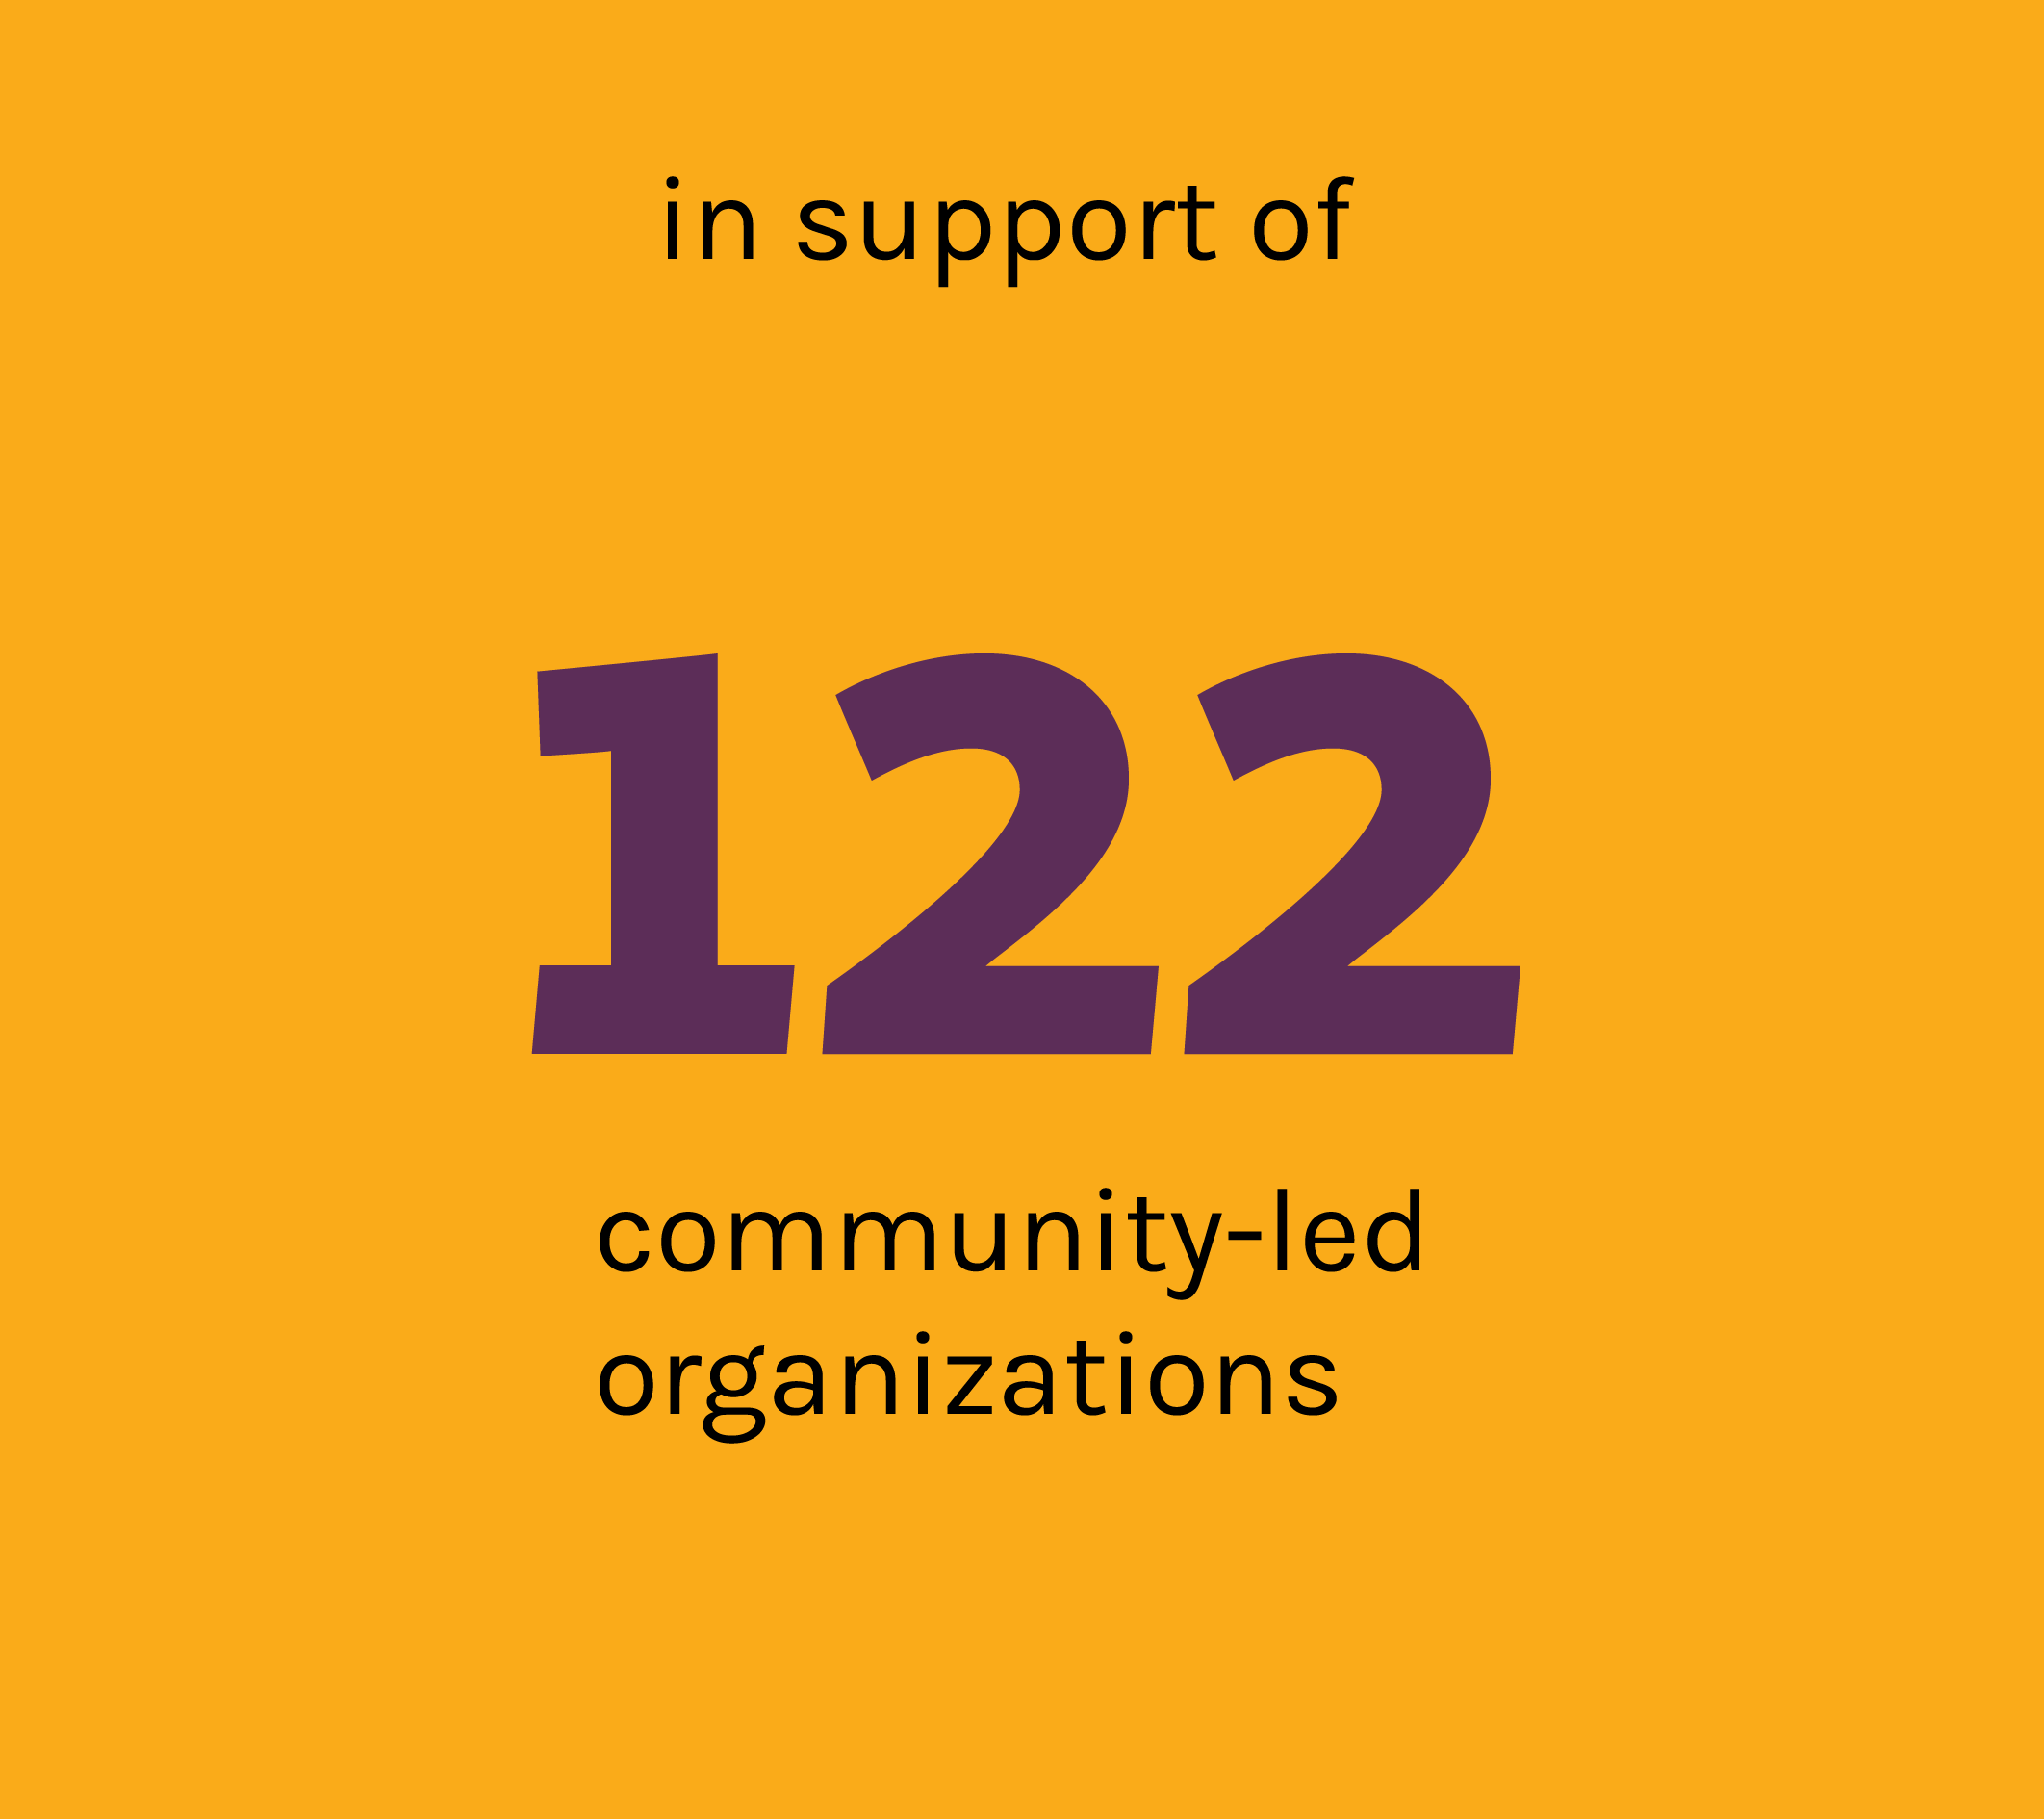 In support of 122 community-led organizations